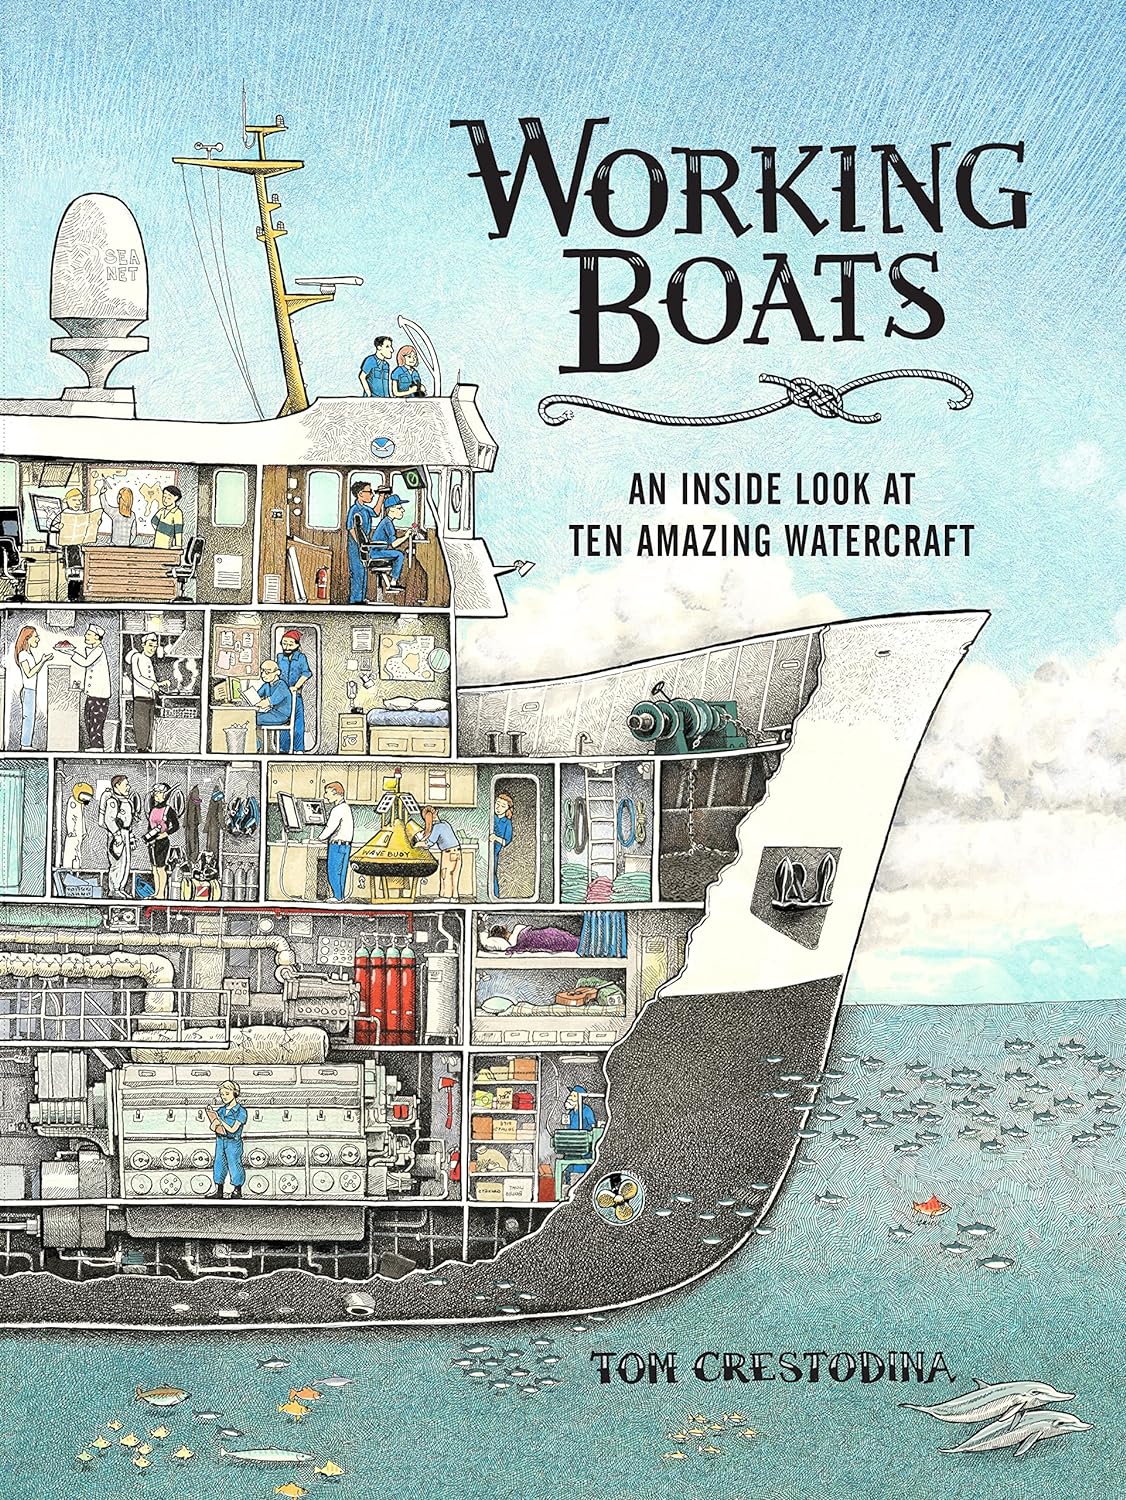 Working Boats: An Inside Look At Ten Amazing Watercrafts